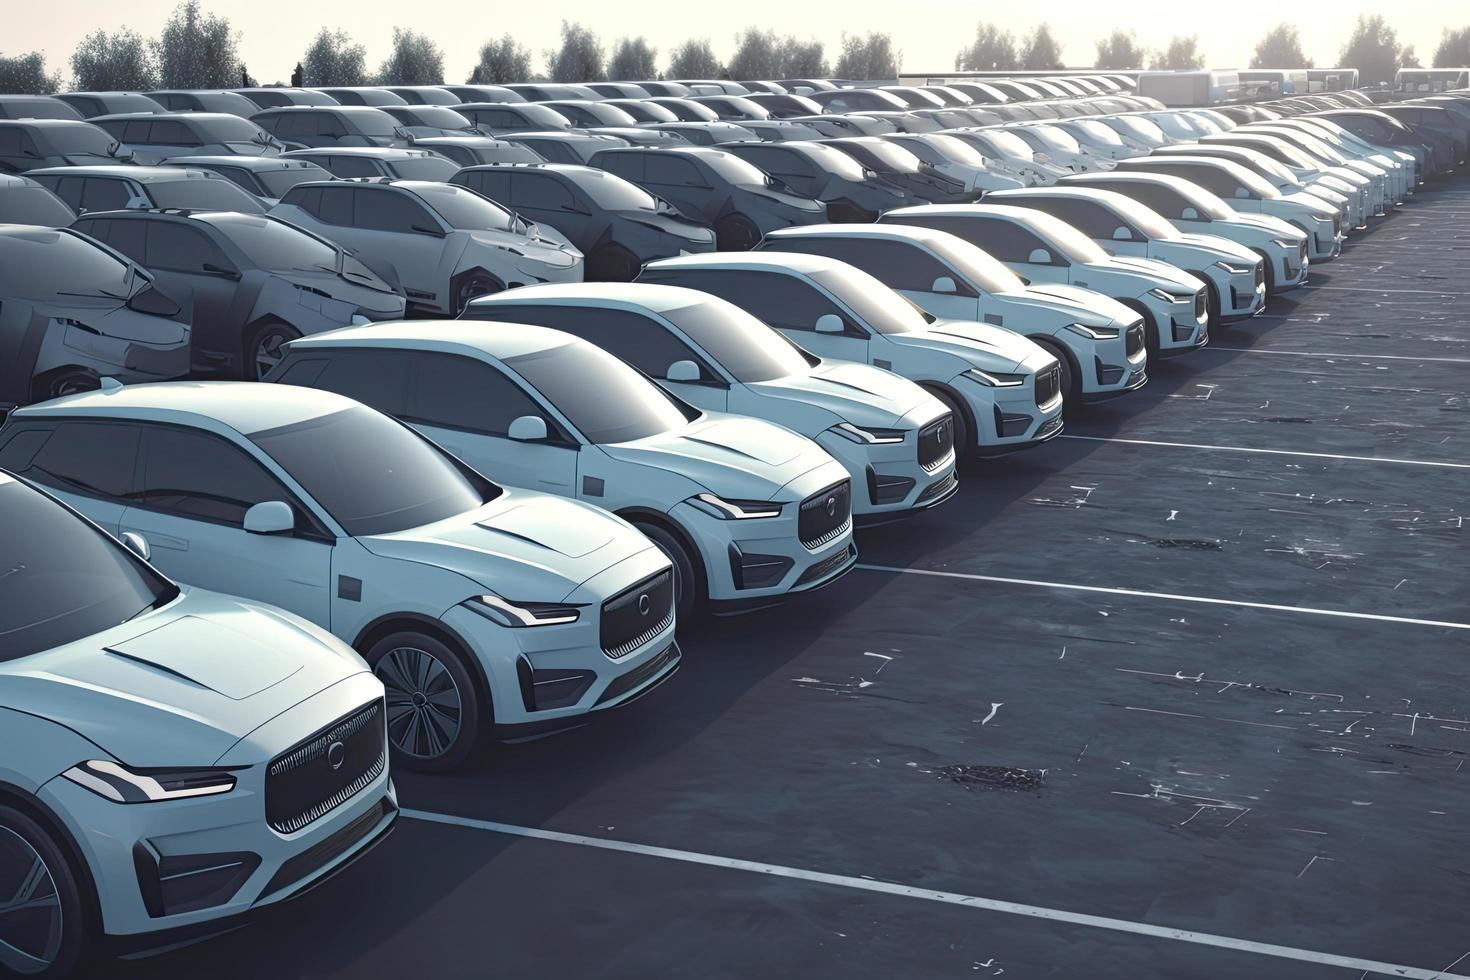 New self driving cars fleet waiting to be exported, large amounts of electric vehicle in dealership parking photo